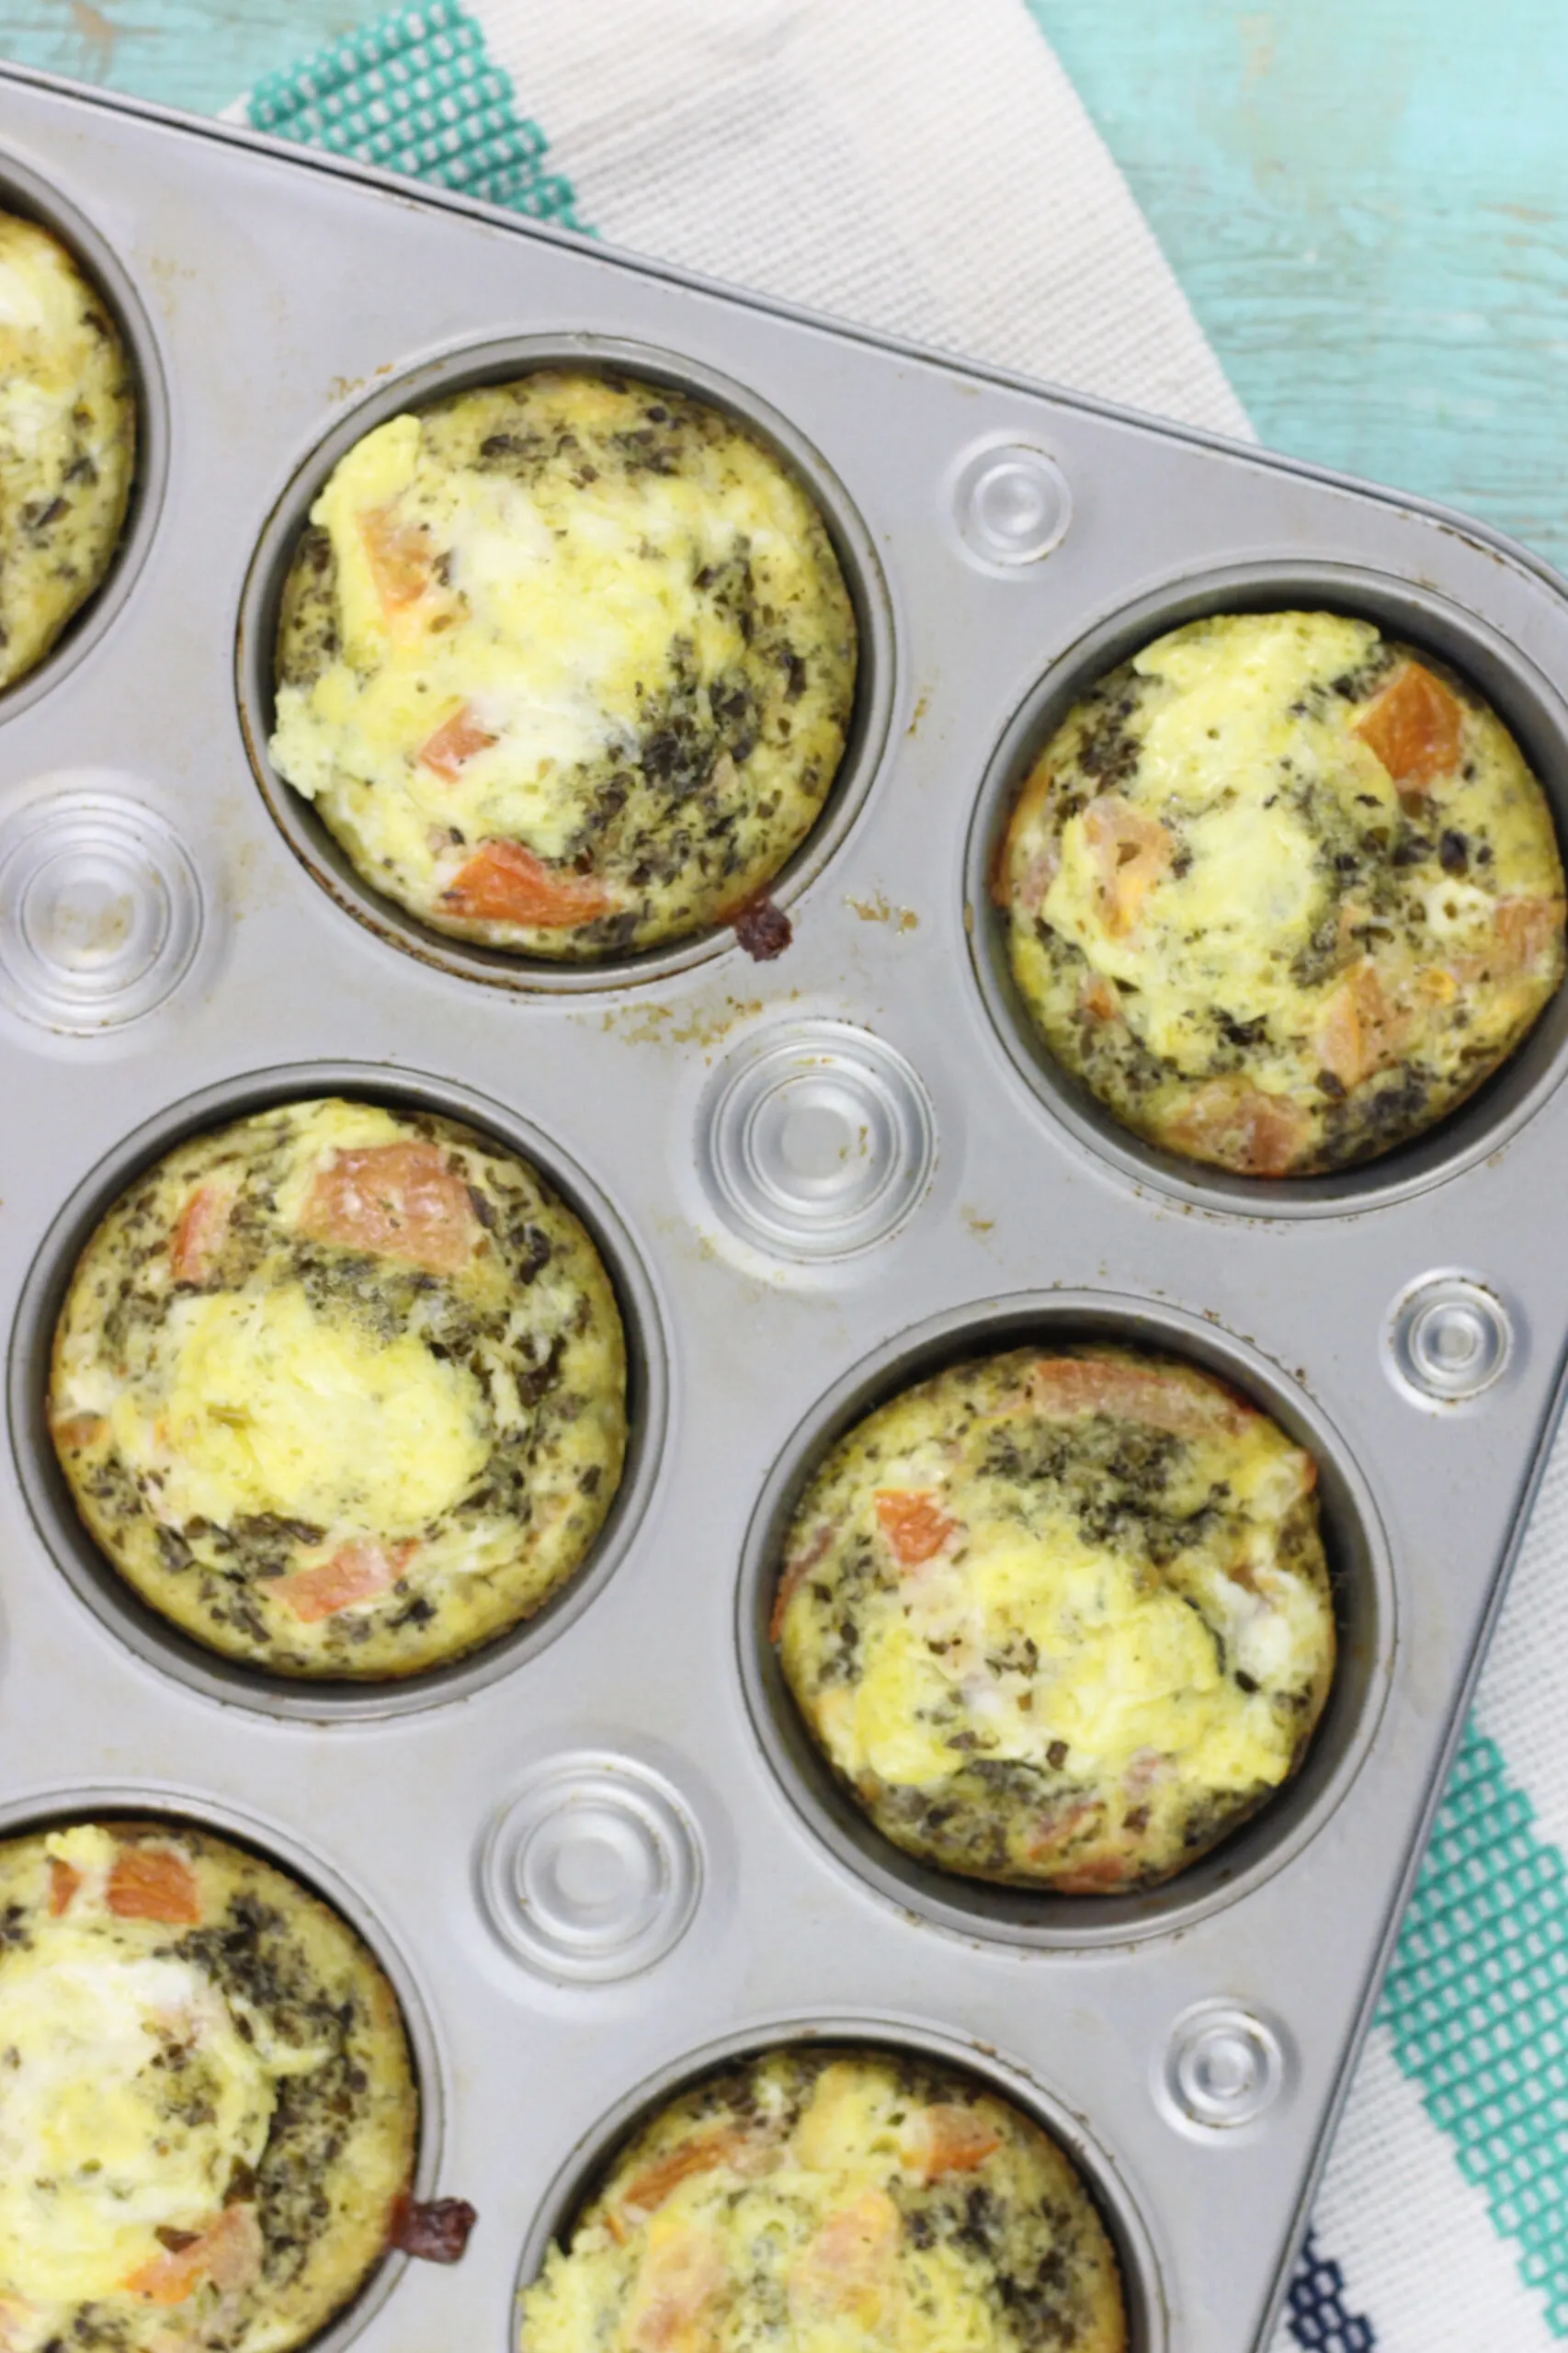 Muffin-Tin Omelets with Feta & Peppers